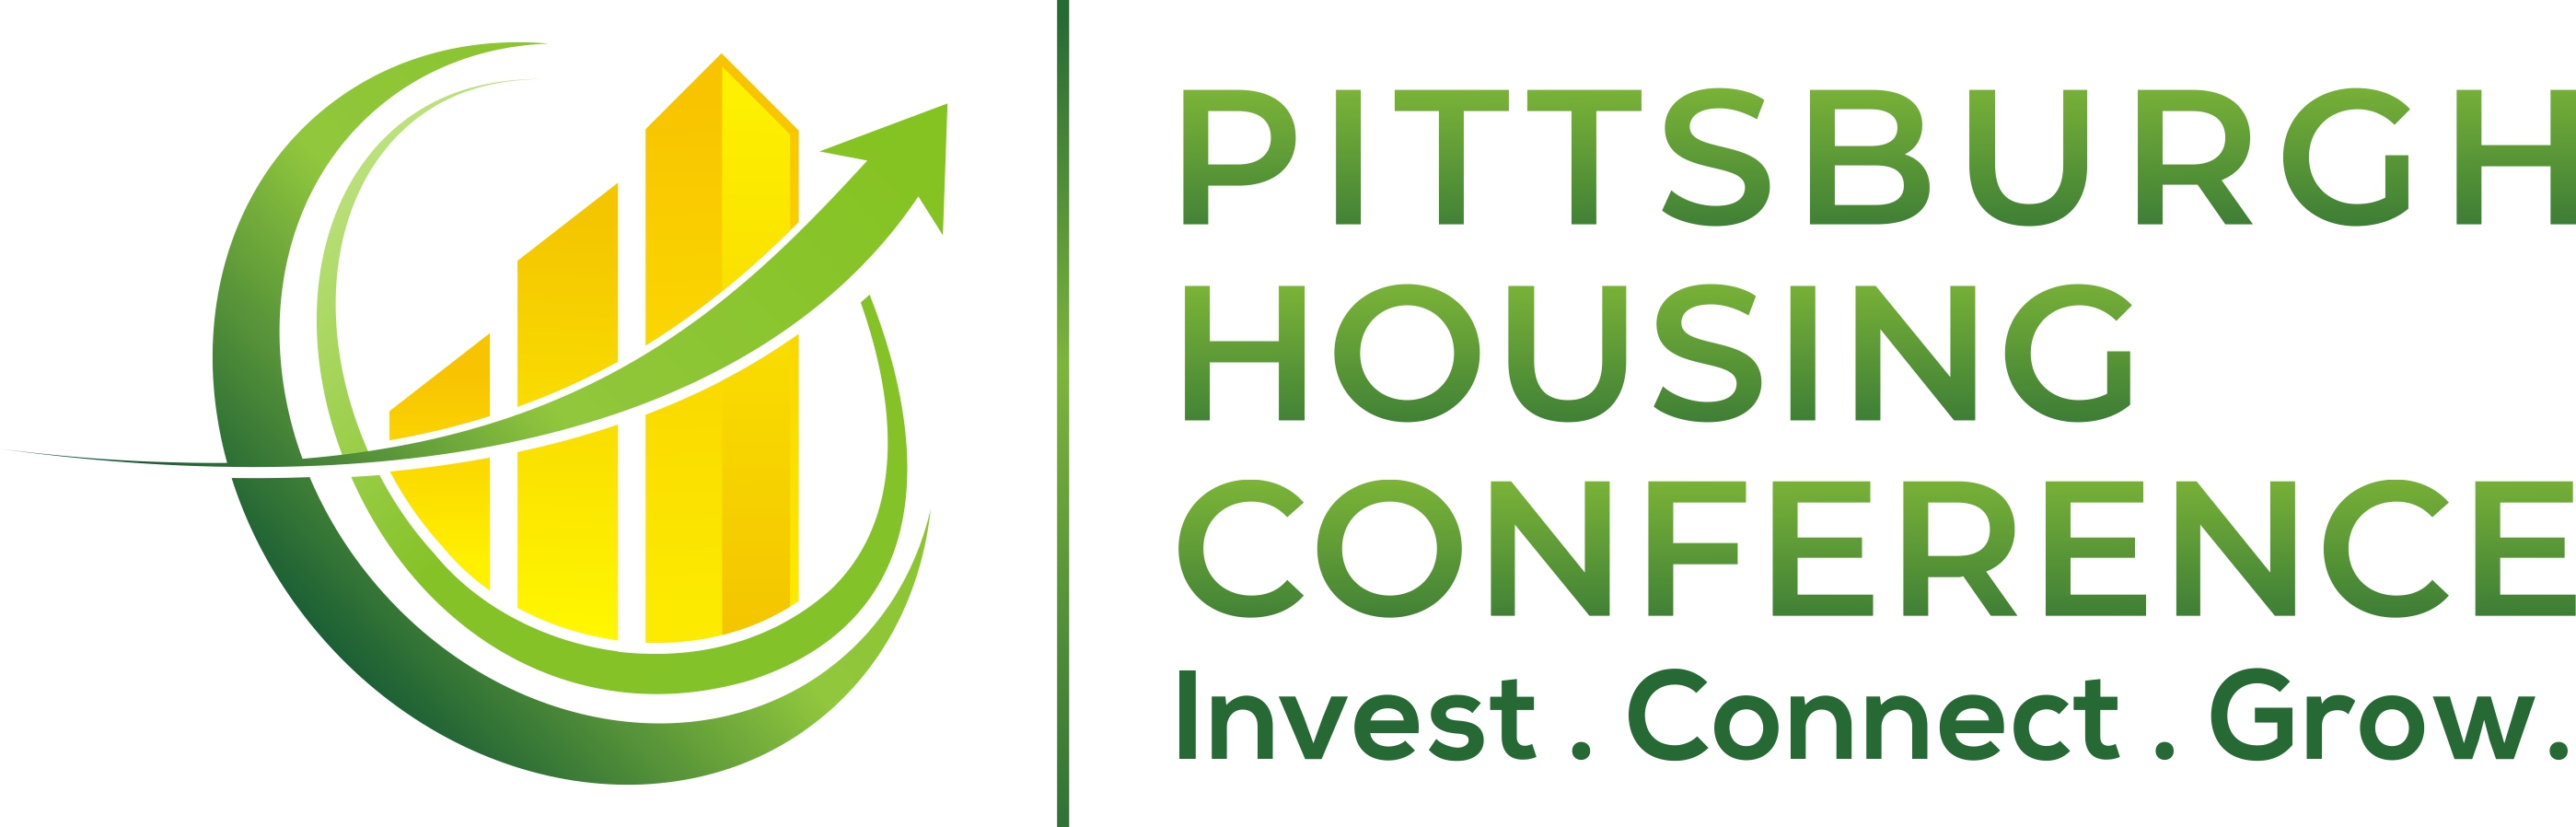 PITTSBURGH HOUSING CONFERENCE